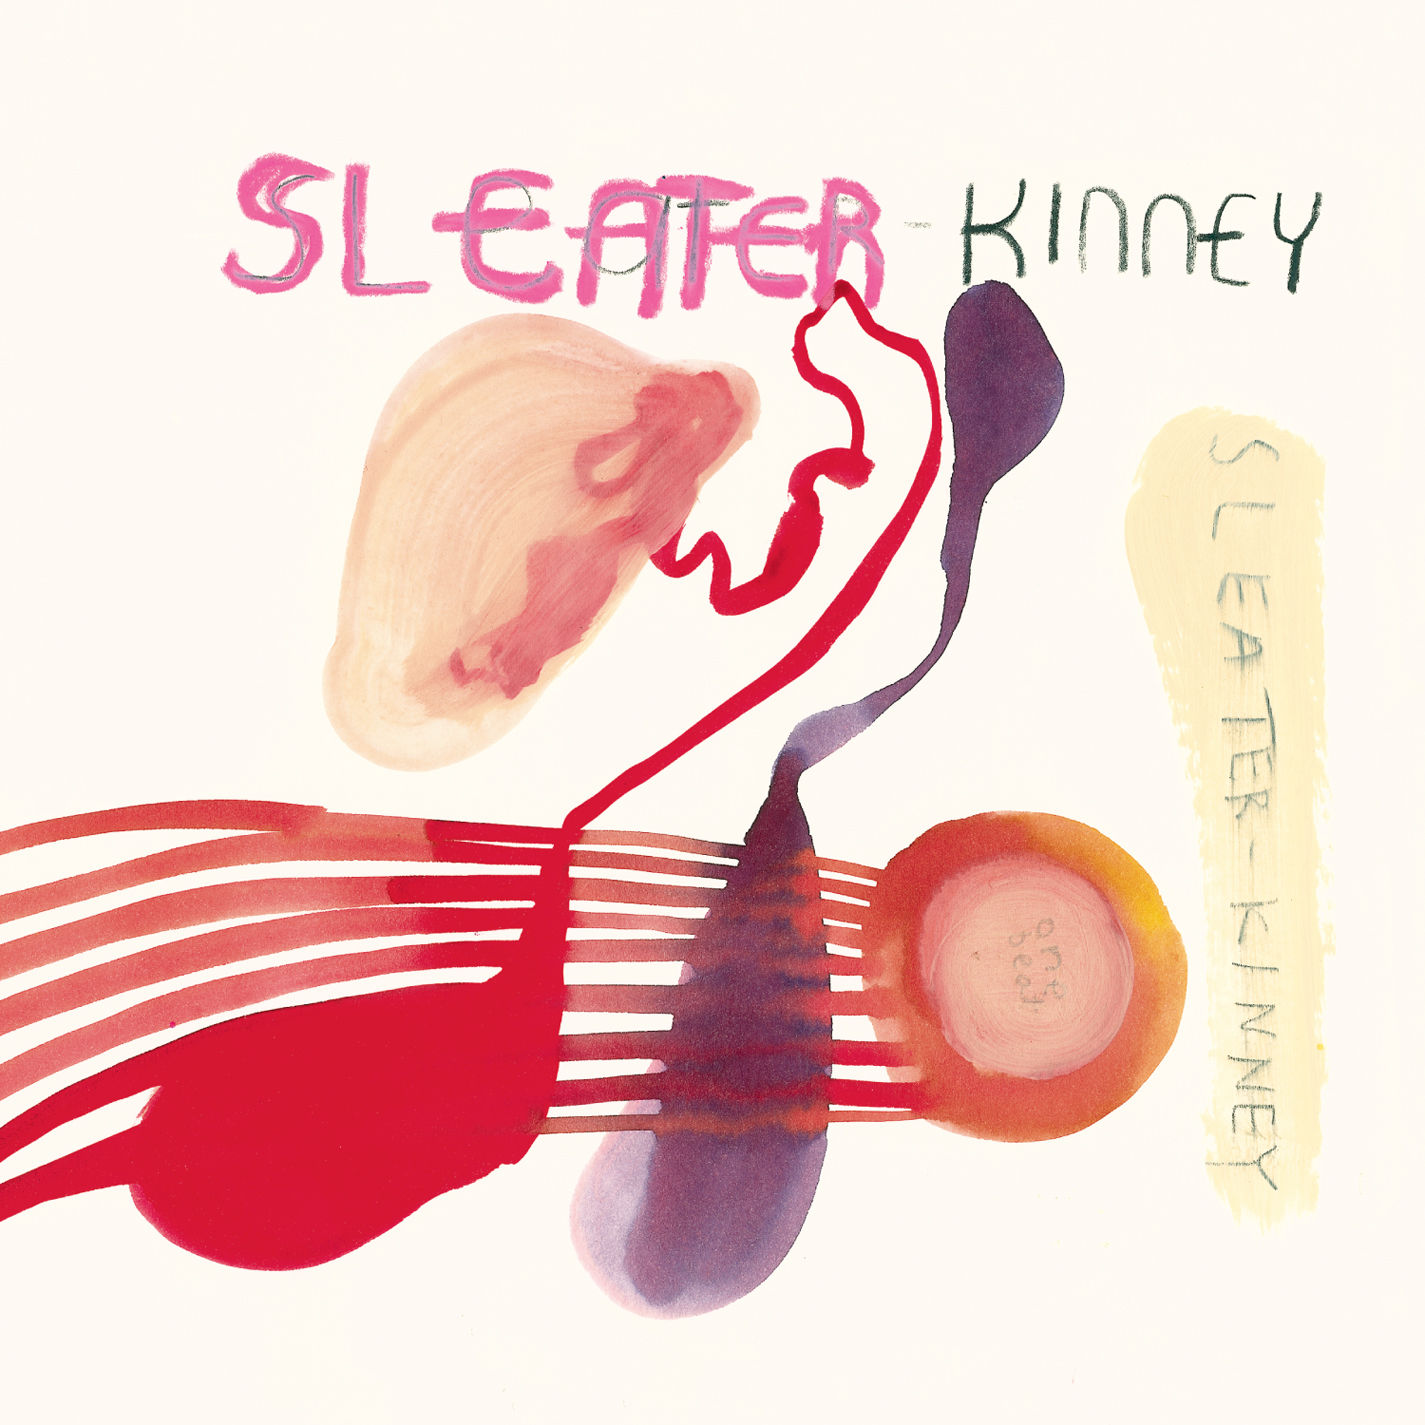 Art for Oh! by Sleater-Kinney